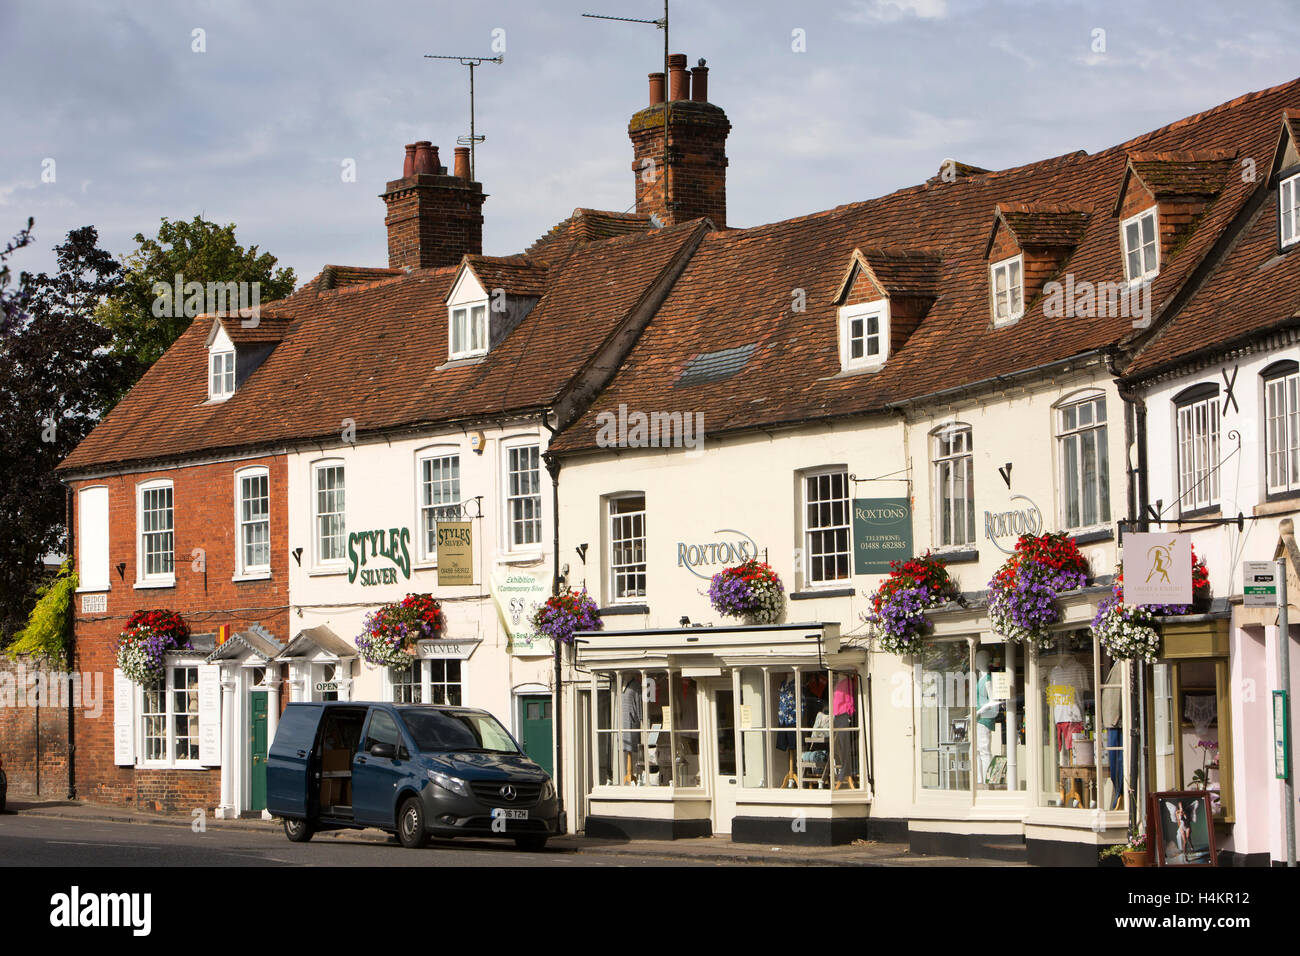 England, Berkshire, Hungerford, Bridge Street, colourful floral hanging baskets on antique shops Stock Photo